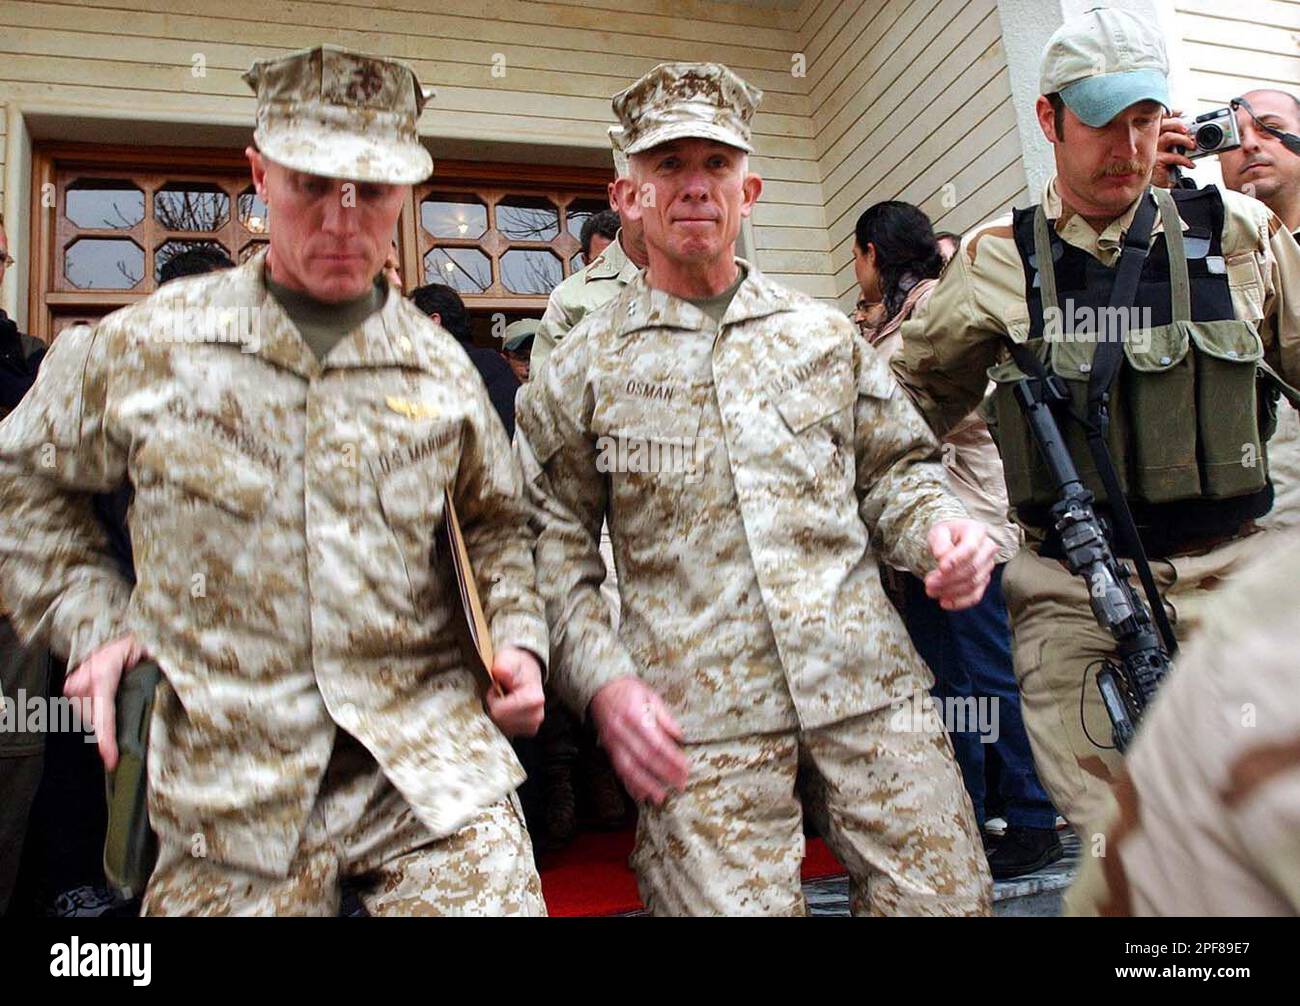 U.S. Marine Corps Maj. Gen. Henry P. Osman, center, is escorted by his unidentified bodyguards after news conference in Salahuddin, Iraq which is controlled by Kurdistan Democratic Party KDP, Monday, March. 24, 2003. Osman, said U.S. forces have arrived in northern in Iraq and he will oversee coordination of humanitarian and military operations in the Kurdistan region of Iraq. (AP Photo/Hasan Sarbakhshian) Stock Photo